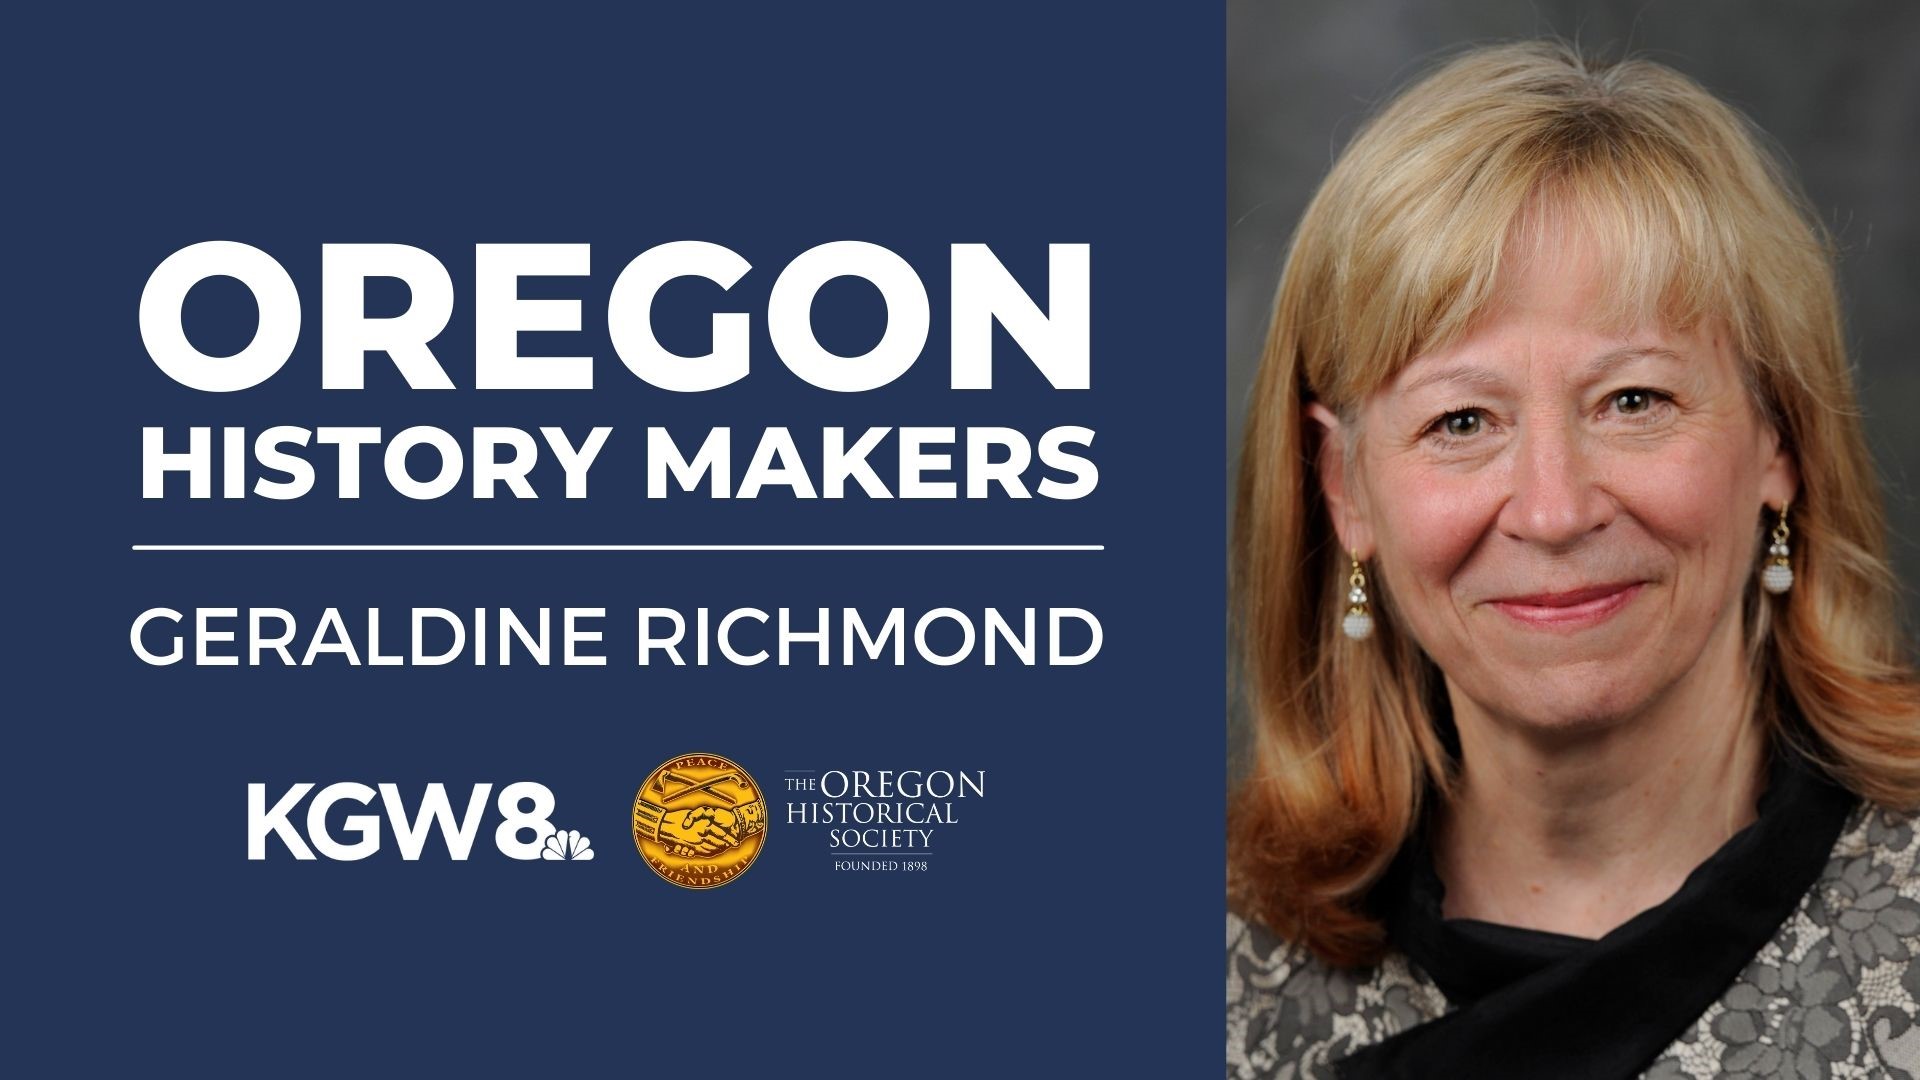 A University of Oregon faculty member for more than 35 years, Richmond was recently nominated by President Biden to serve in the United States Department of Energy.